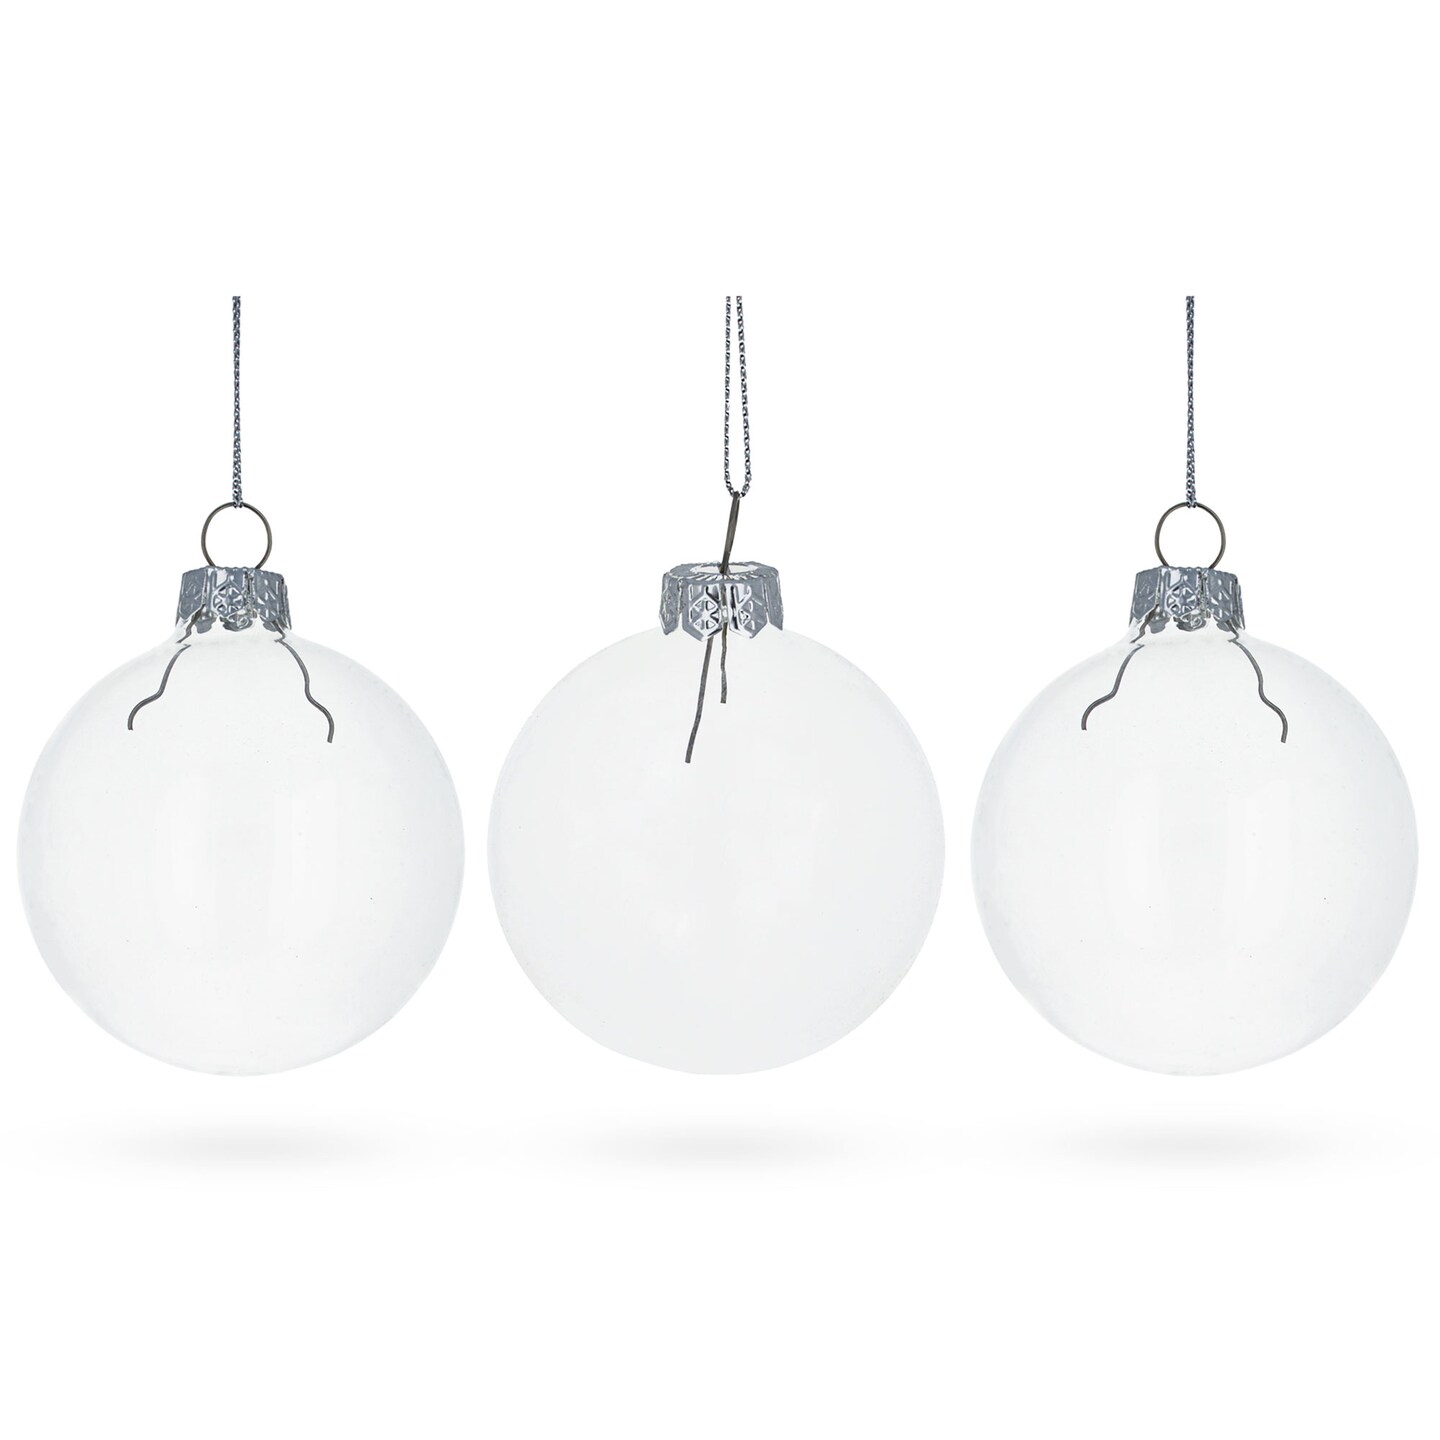 Set of 3 Clear - Blown Glass Ball Ornament 3.05 Inches (78 mm)